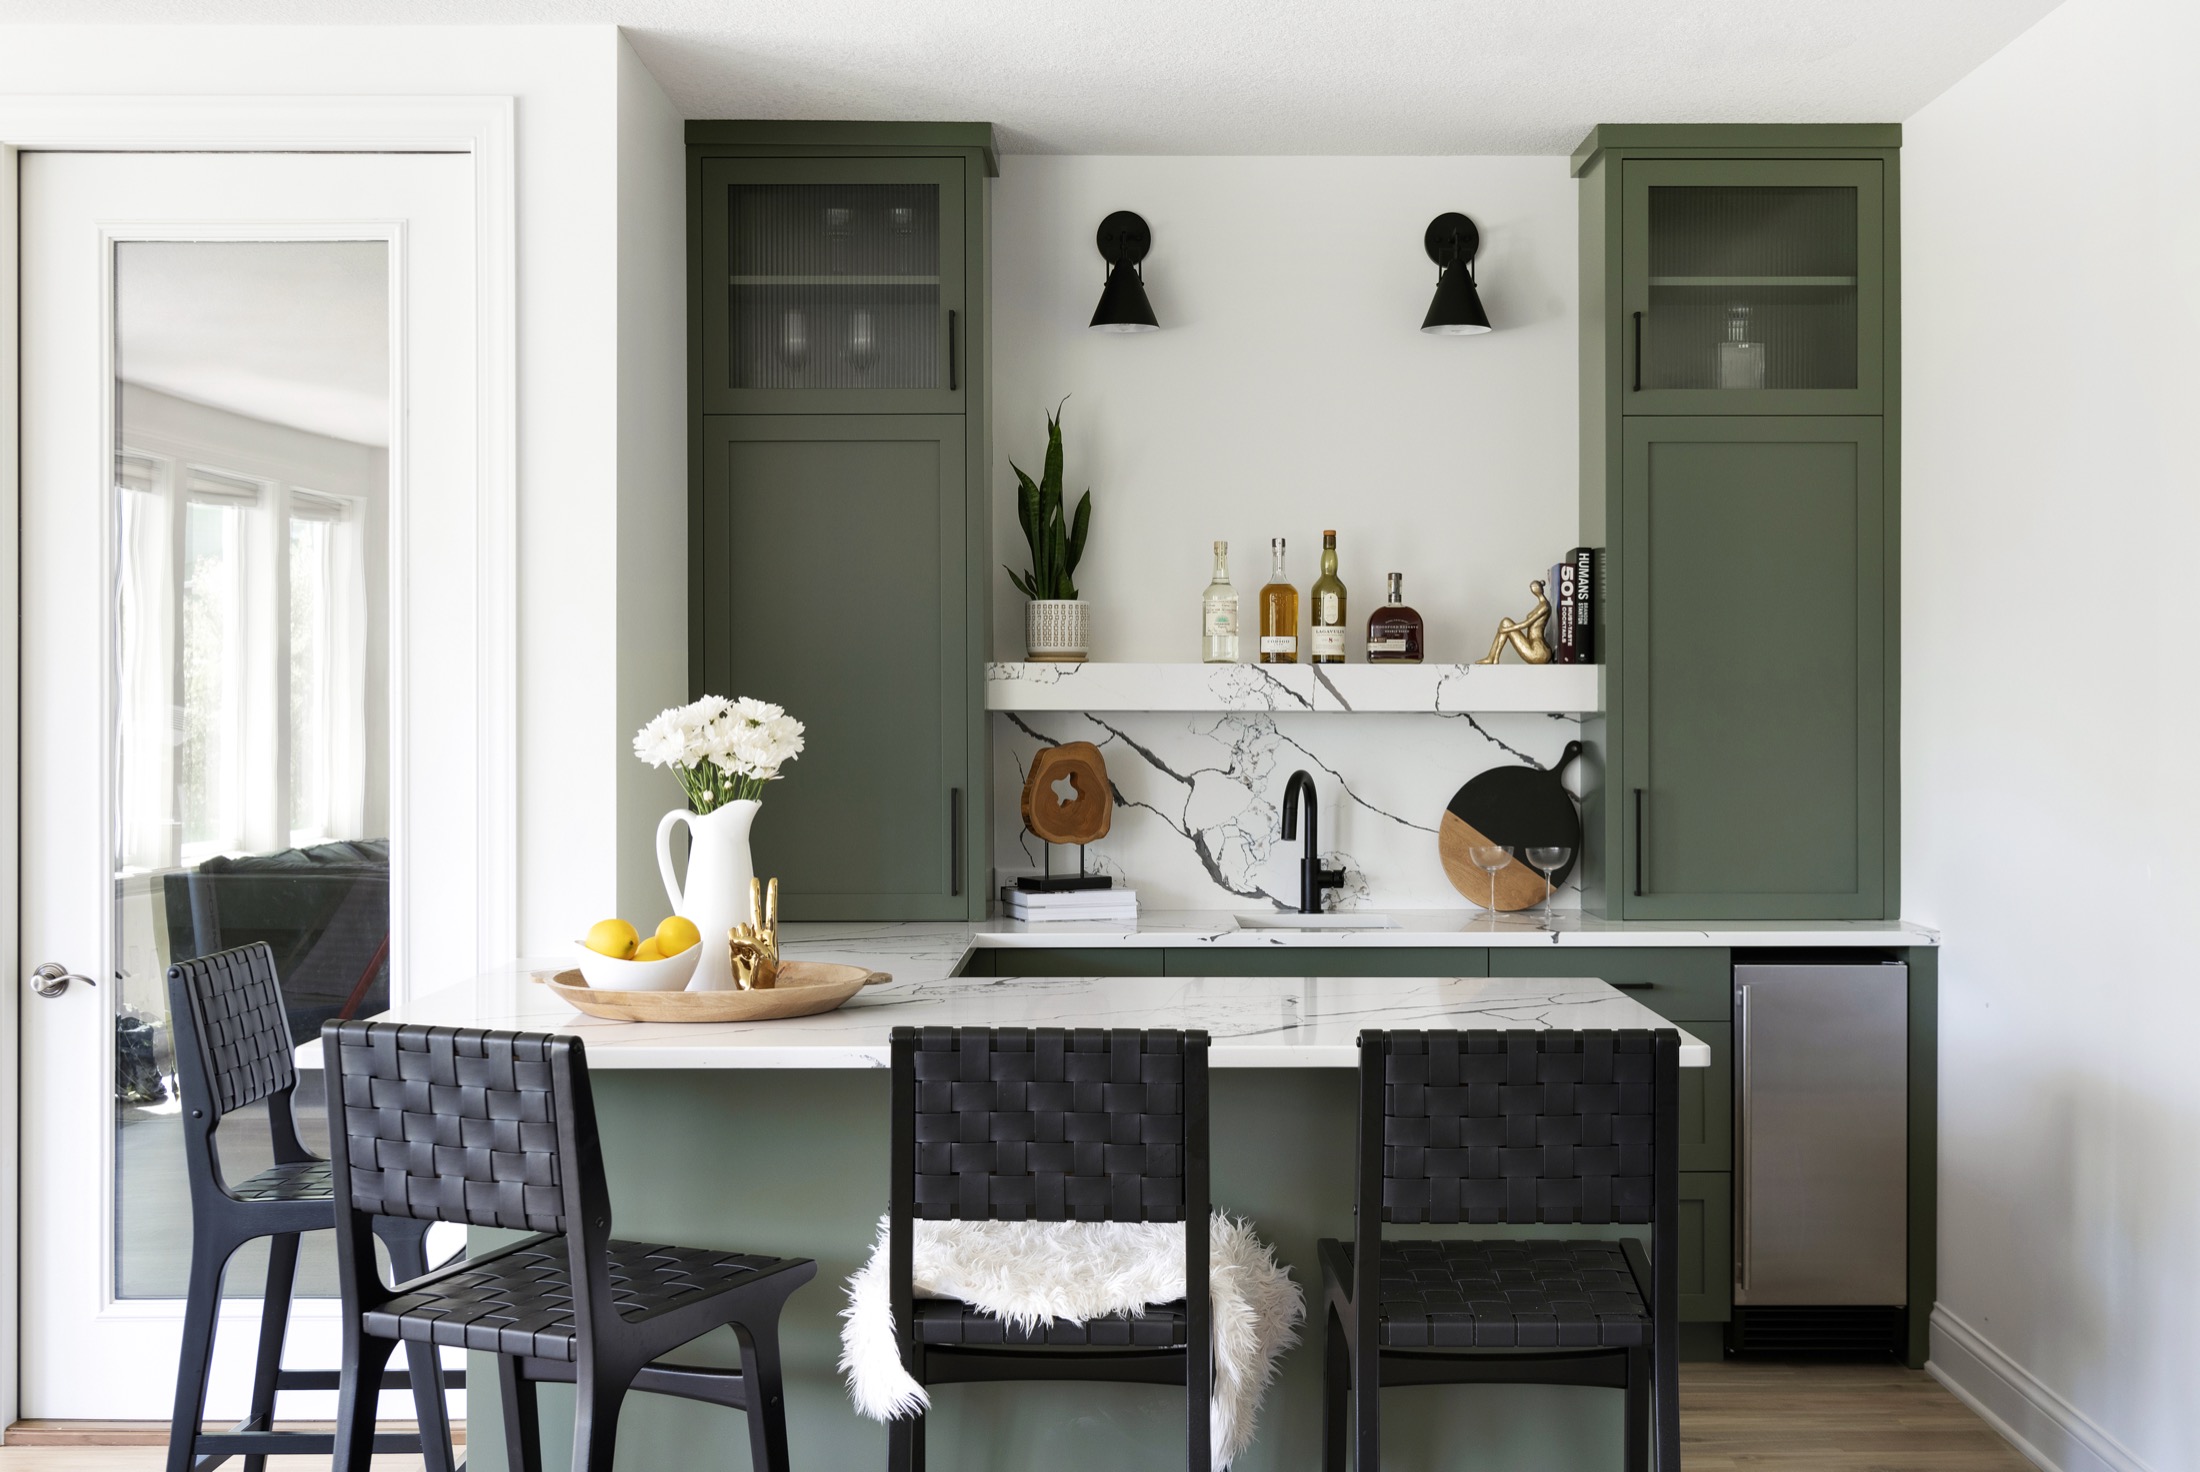 Classy Kitchen with Green Cabinets. Dry bar.